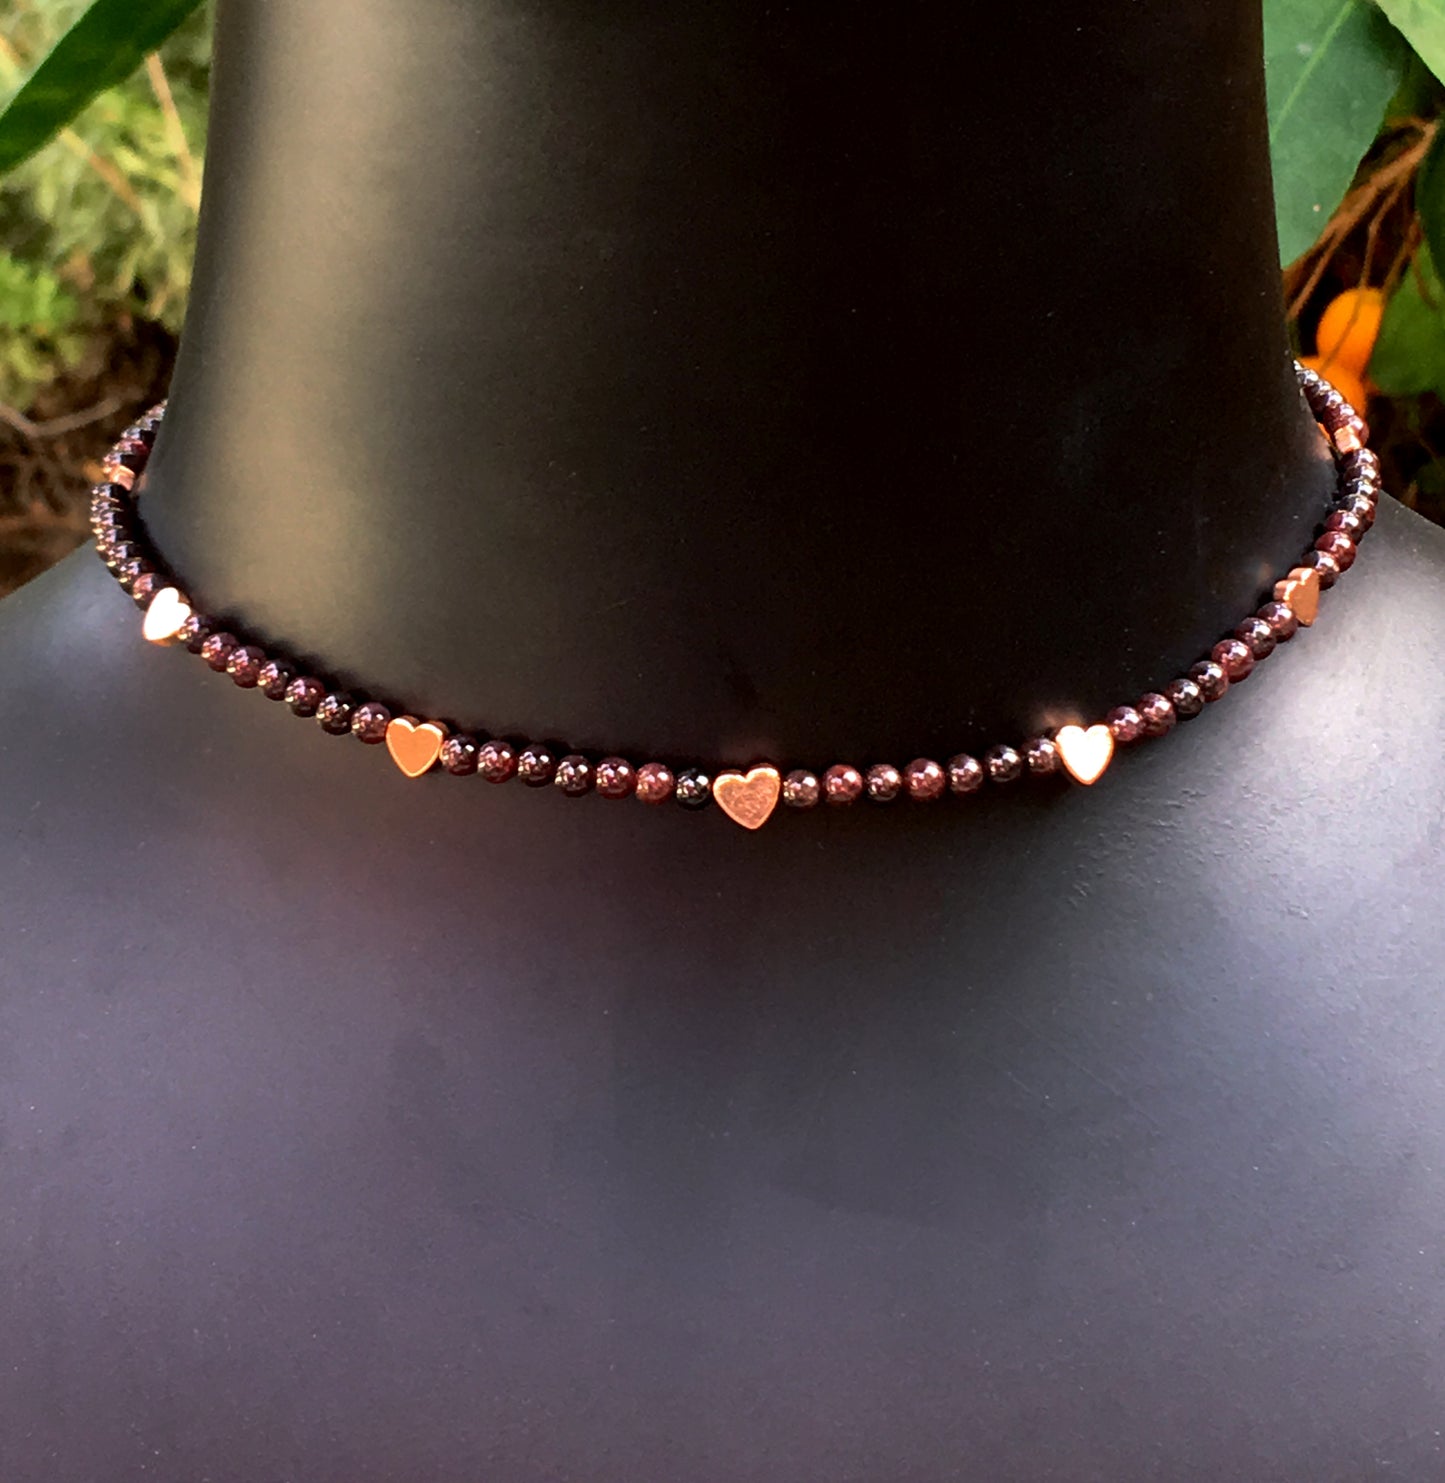 Hematite Hearts Choker necklace with various Gemstone